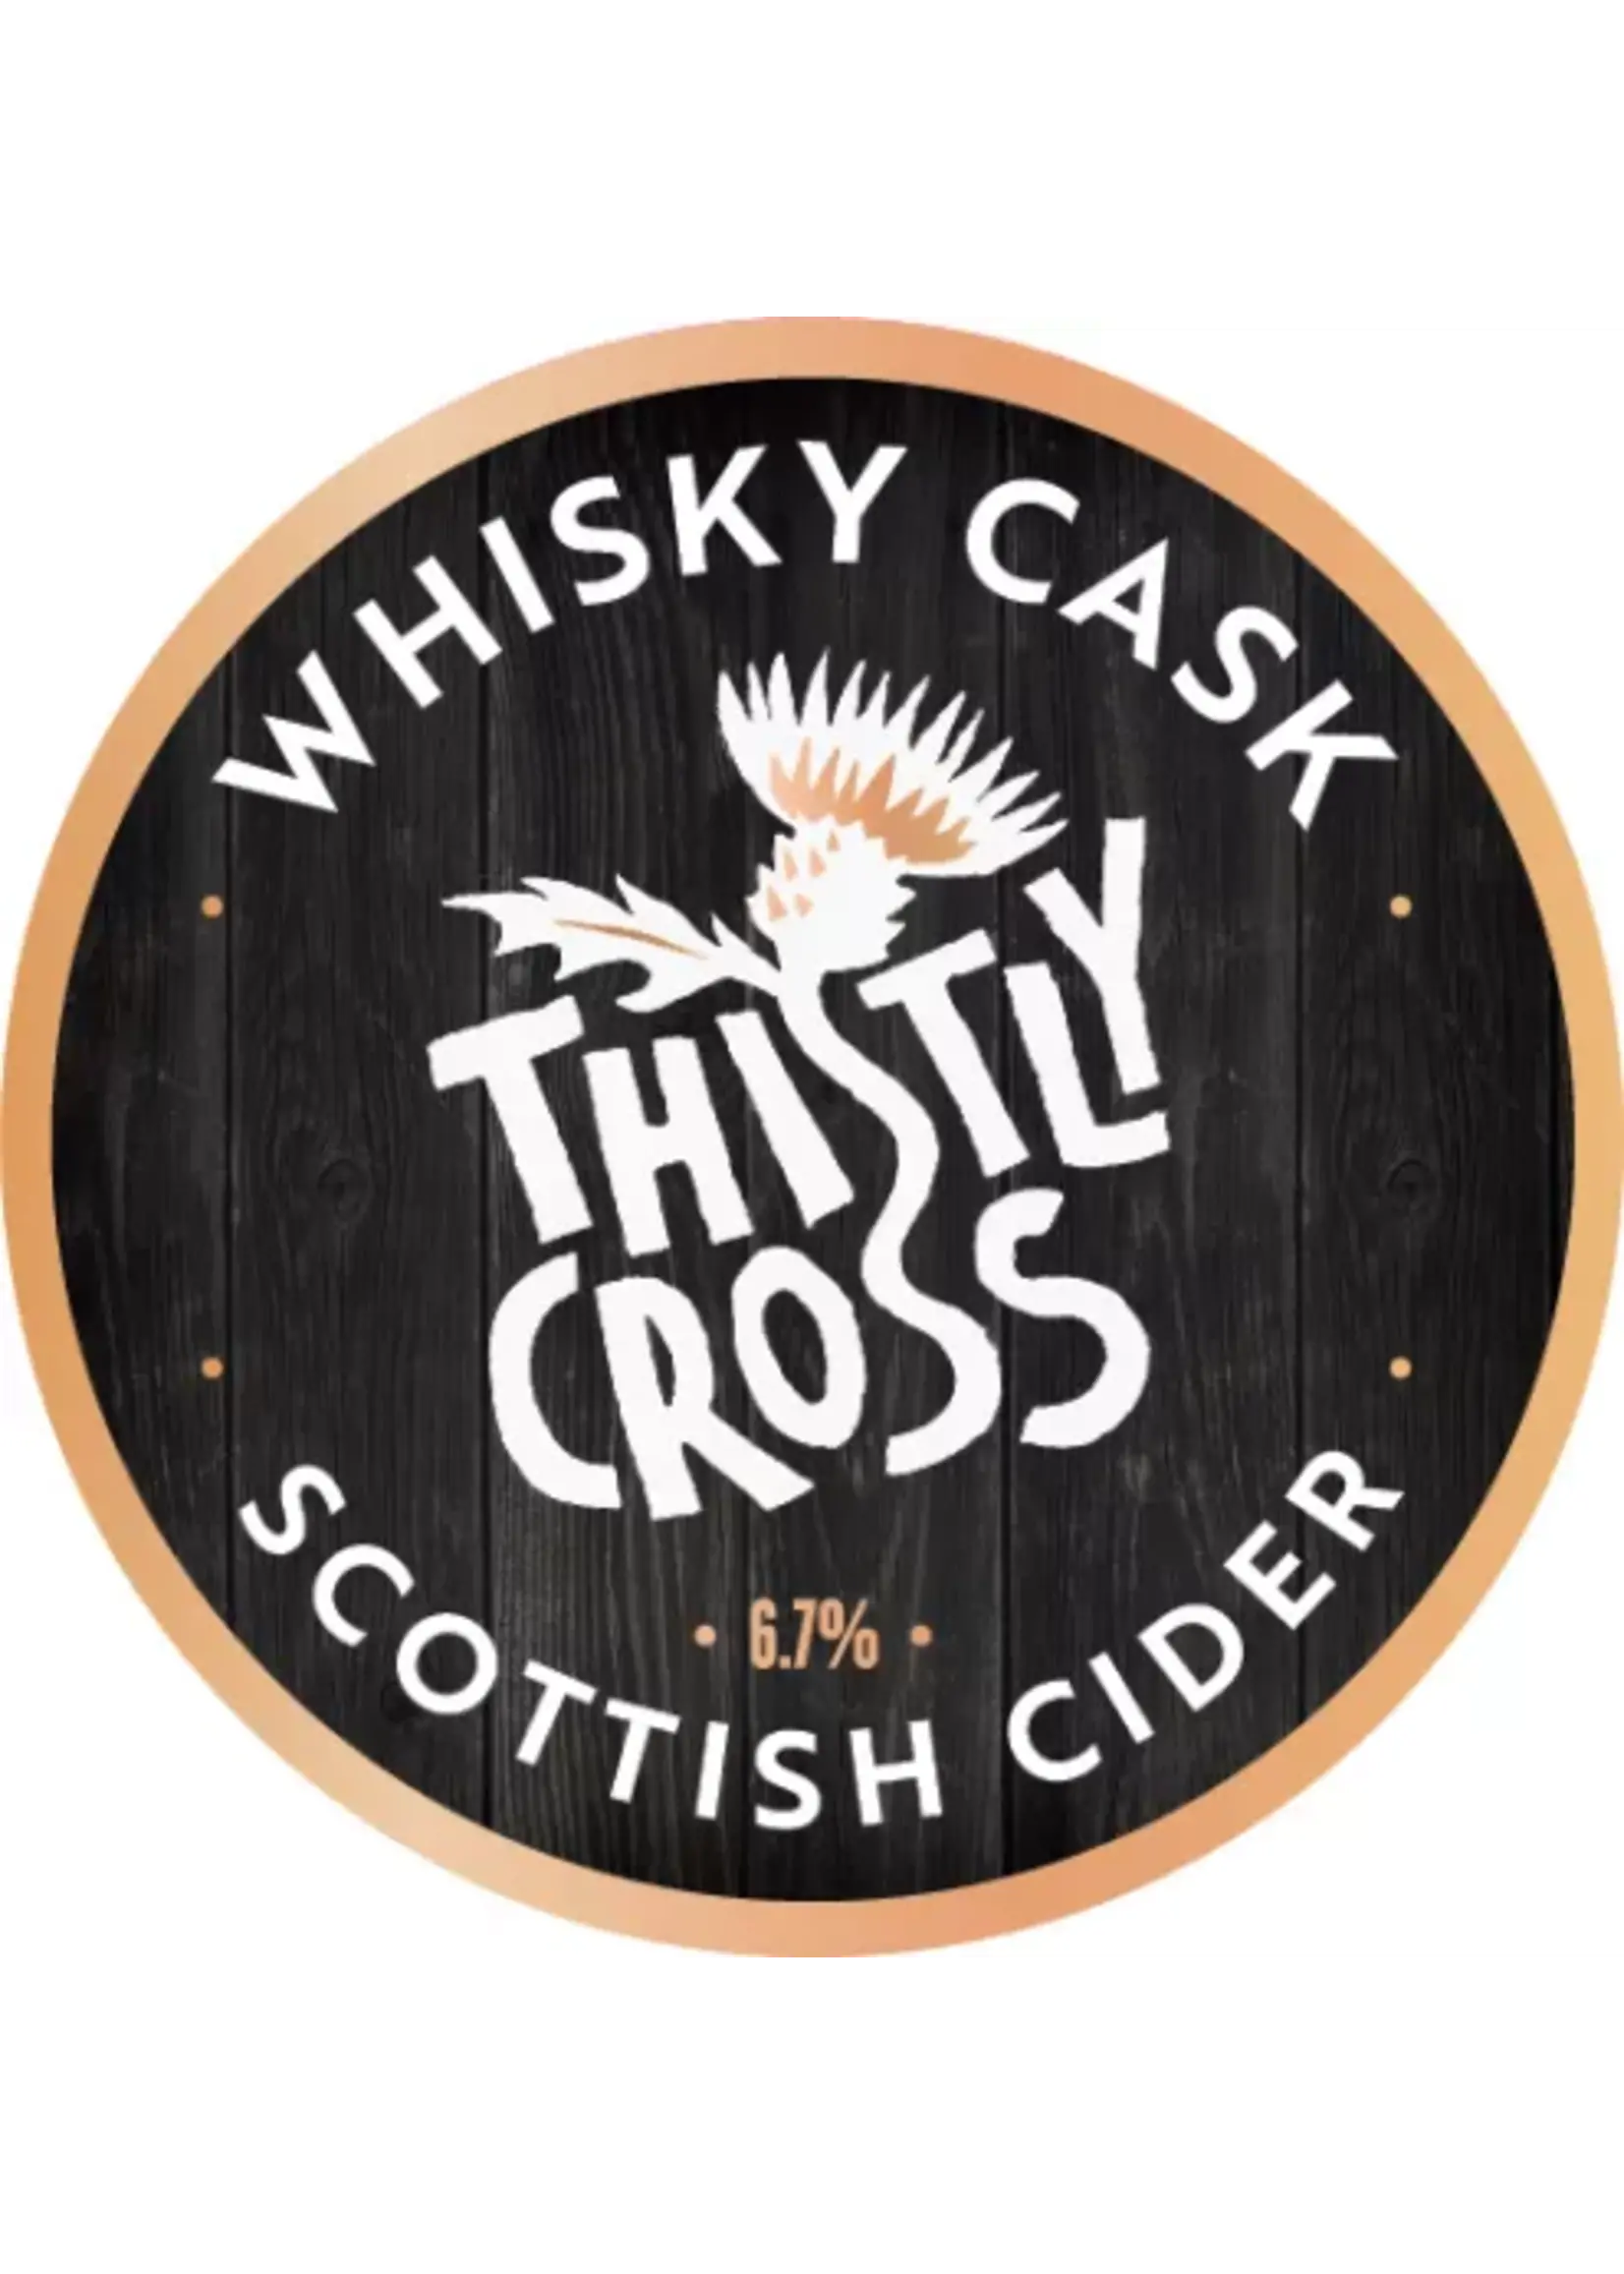 Thistly Cross Thistly Cross - Whisky Cask Cider - 33cl